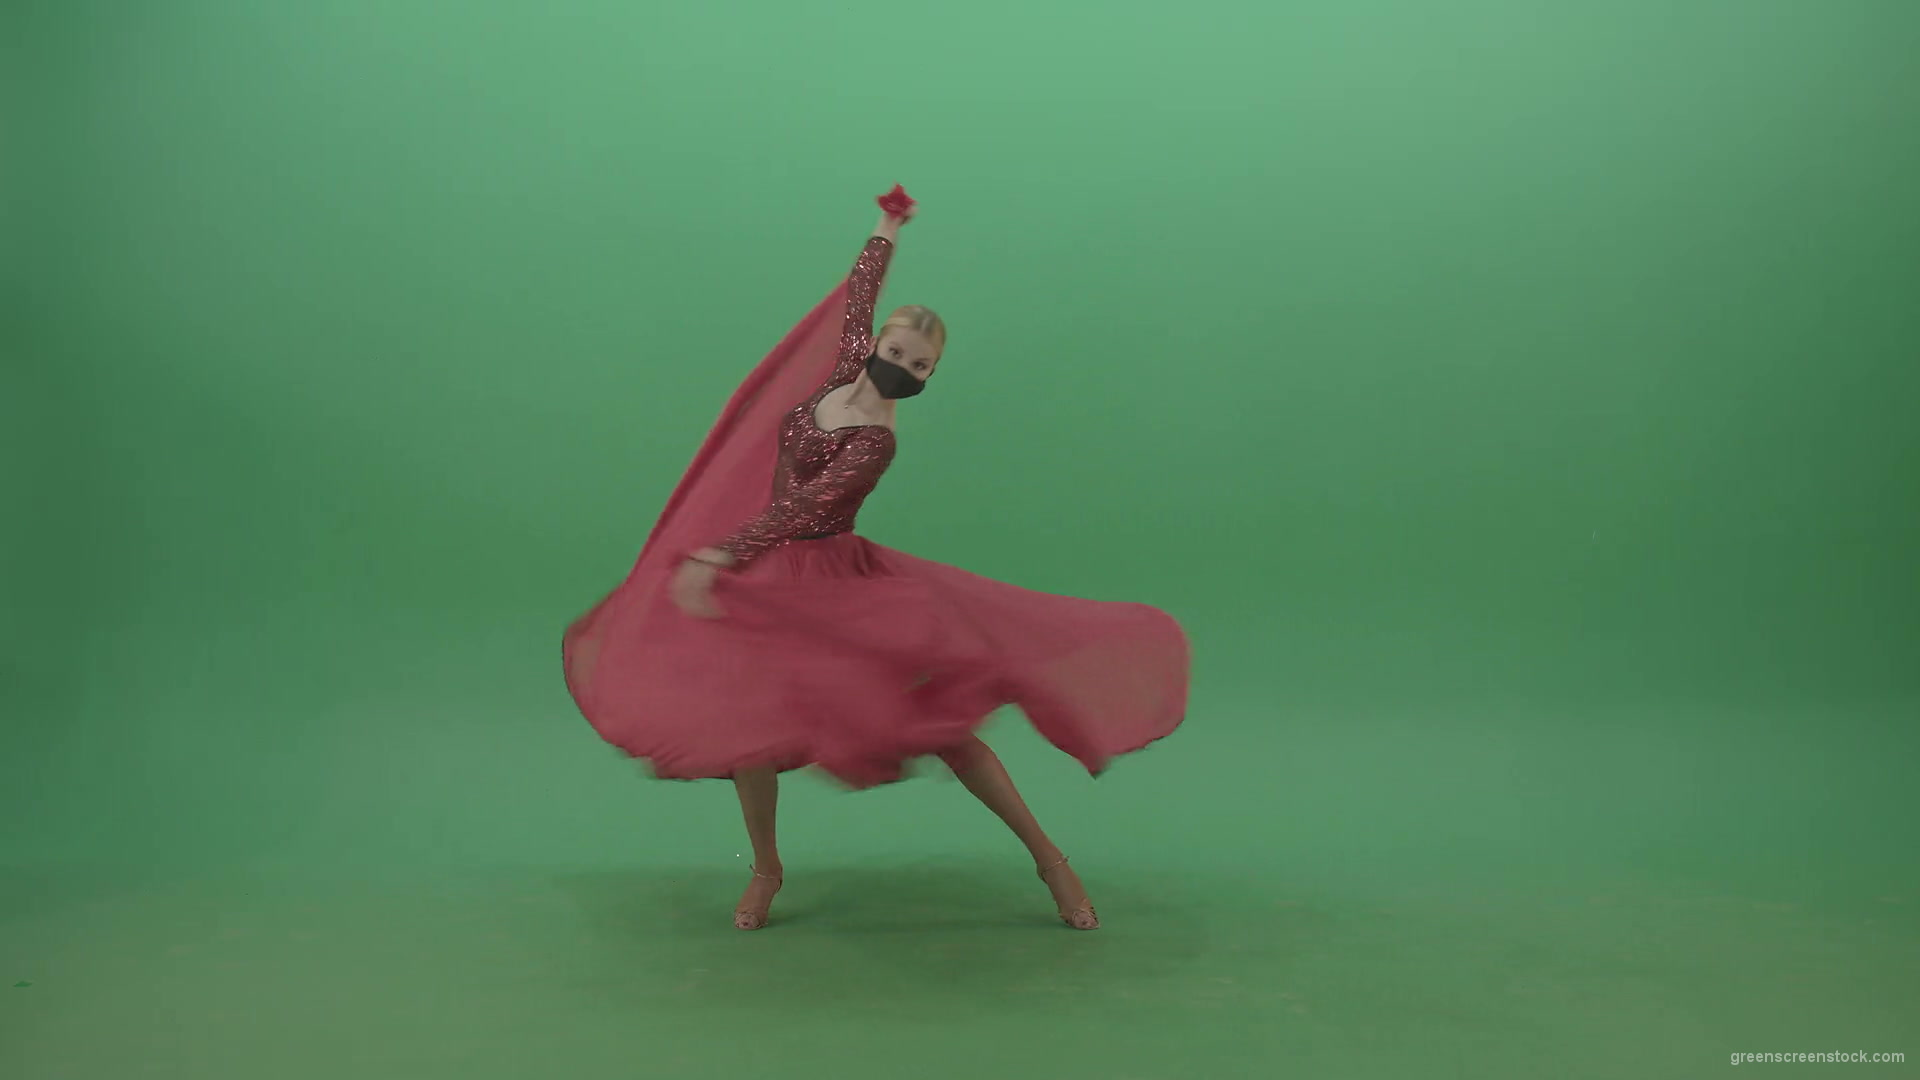 Blonde-Girl-in-red-Flamenco-Dress-makes-spinning-bowing-isolated-on-green-screen-4K-Video-Footage-1920_007 Green Screen Stock